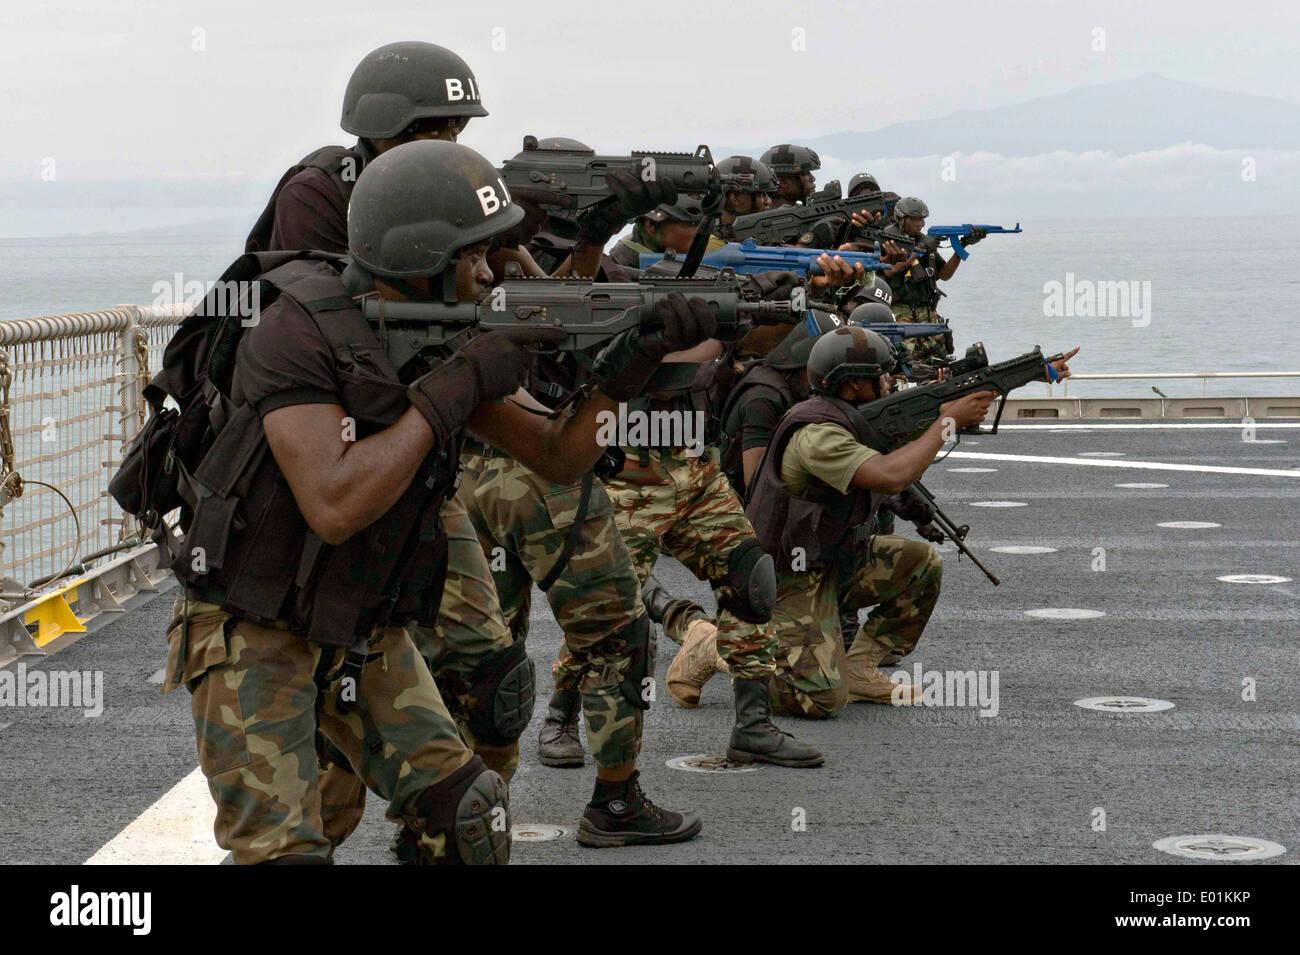 Nigerian sailors with the Special Boat Service and Cameroonian soldiers with the Rapid Intervention Battalion secure the flight deck during a simulated boarding scenario aboard the joint high speed vessel USNS Spearhead during Obangame Express joint training with US Navy SEAL team members April 20, 2014 in the Gulf of Guinea. Stock Photo